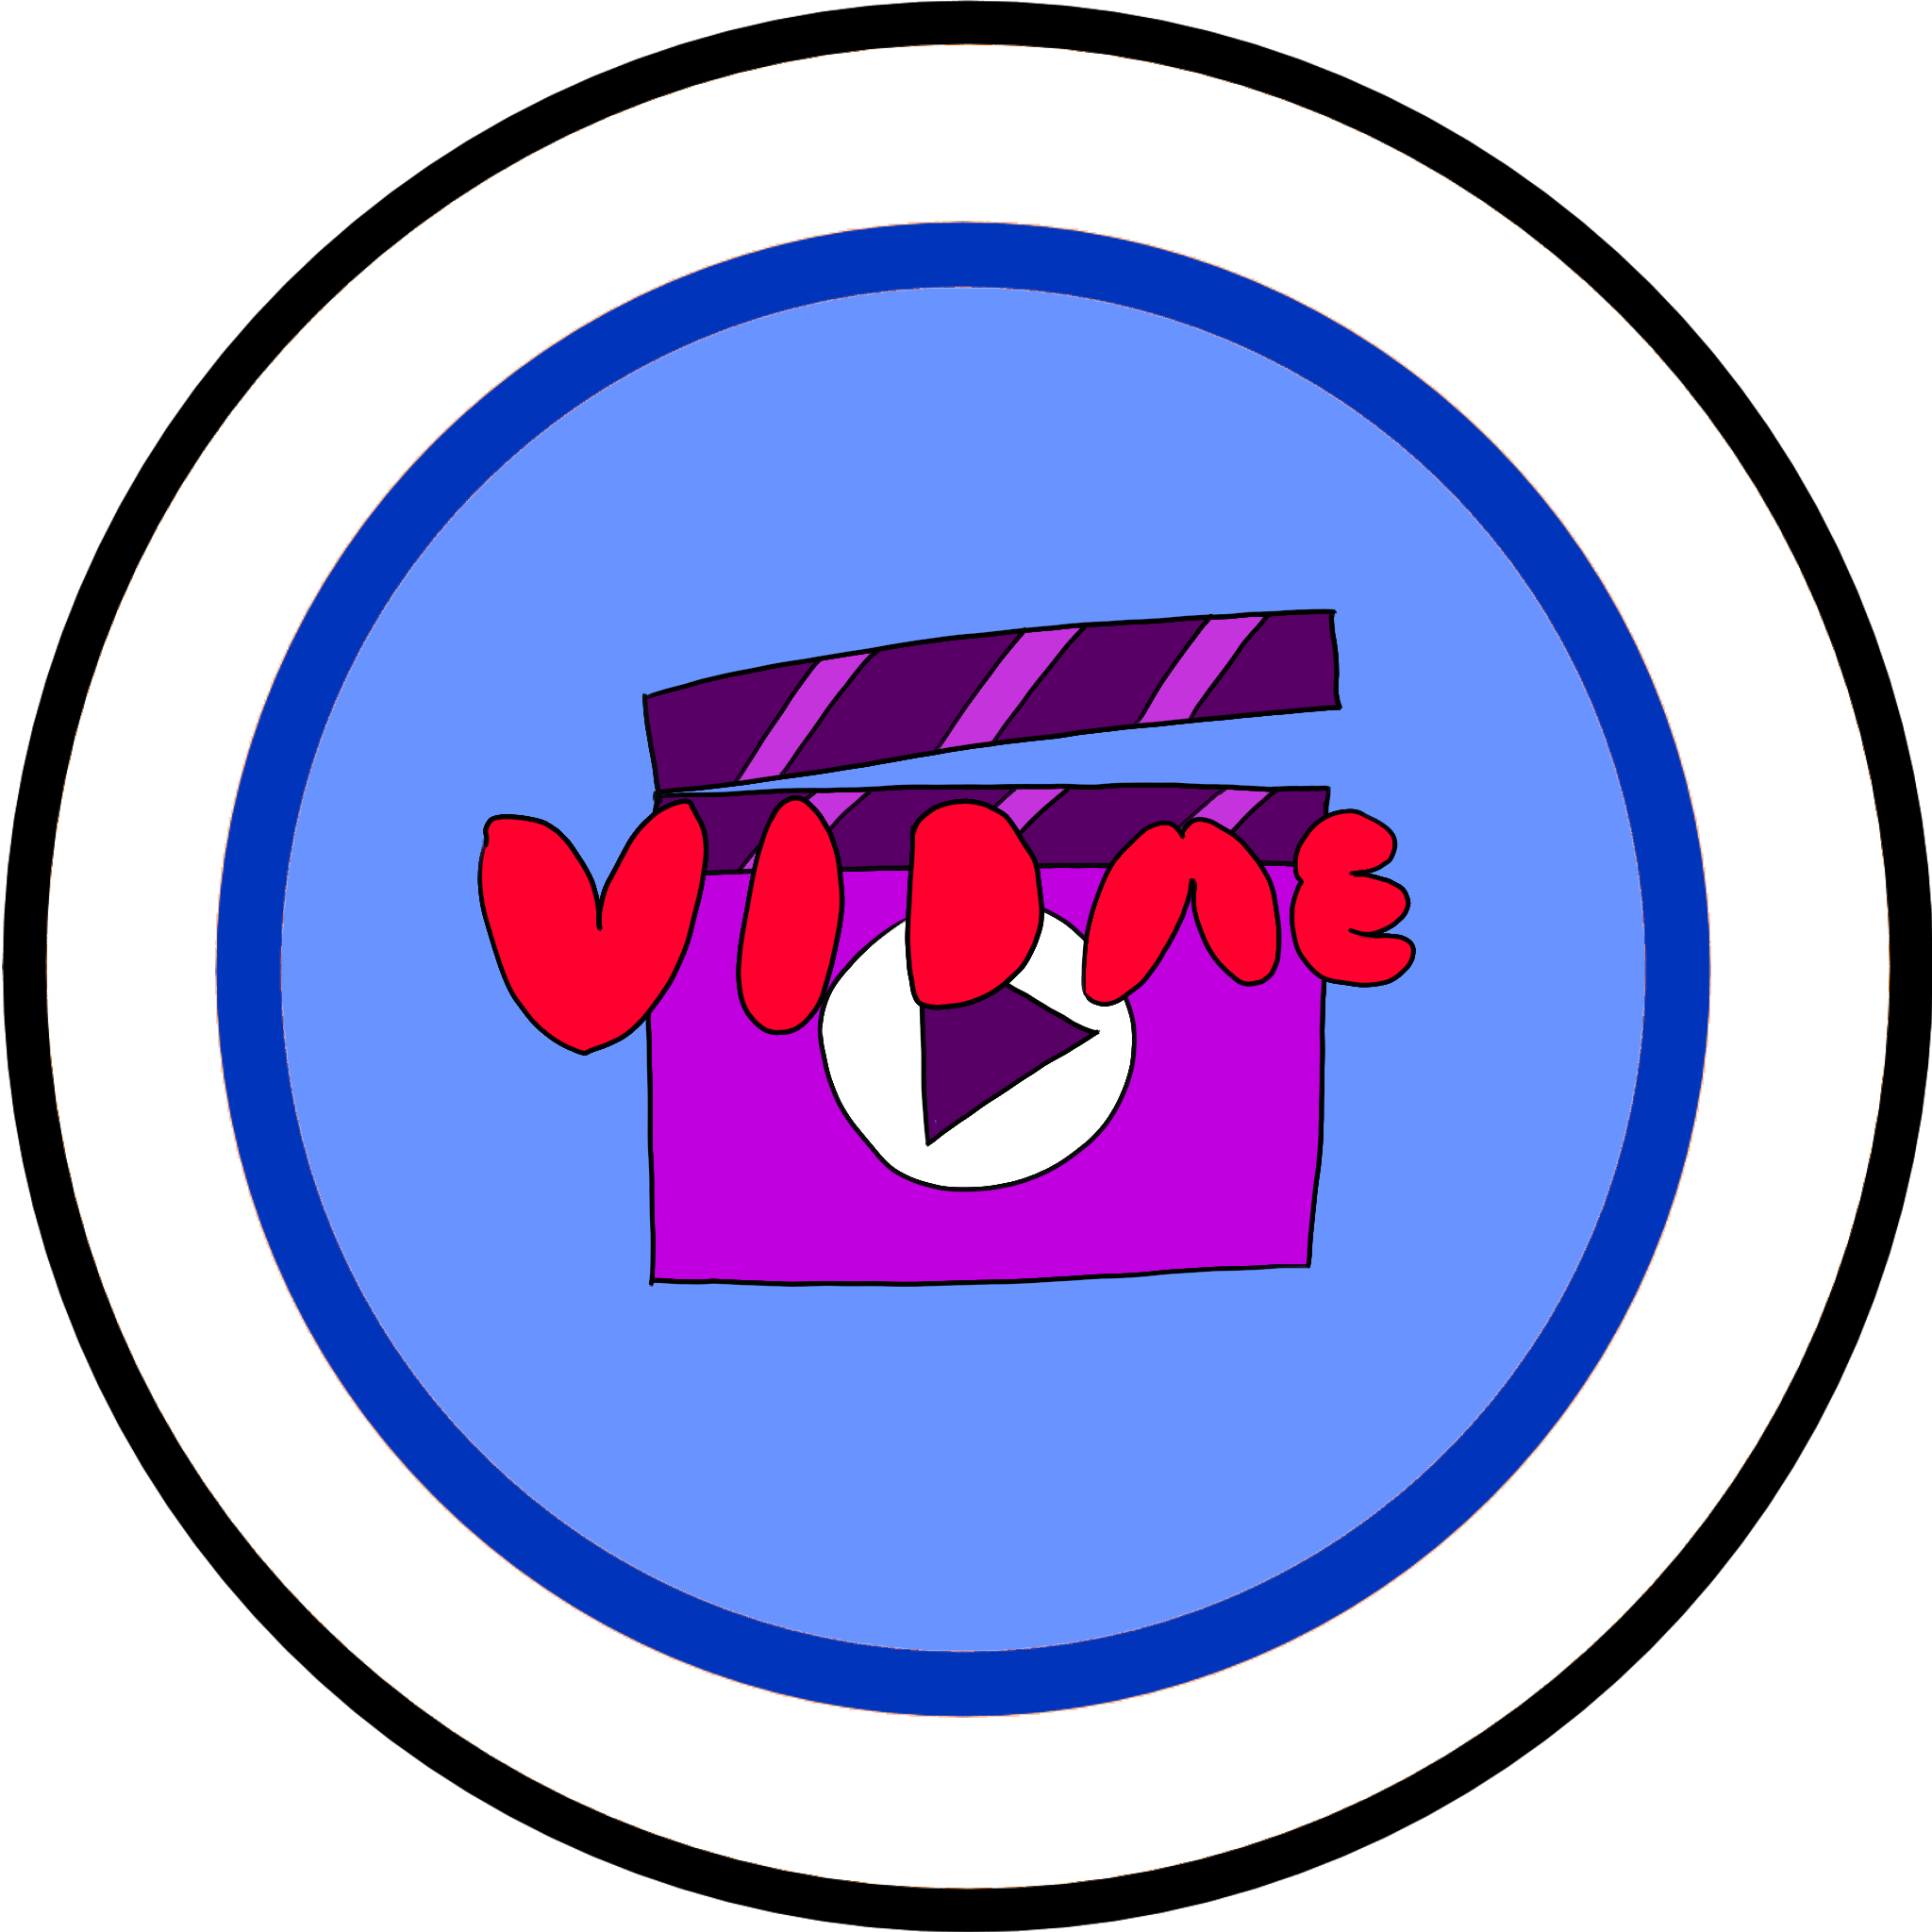 A small logo representing vidme-client - consist of a video-play board with the text vidme on top.